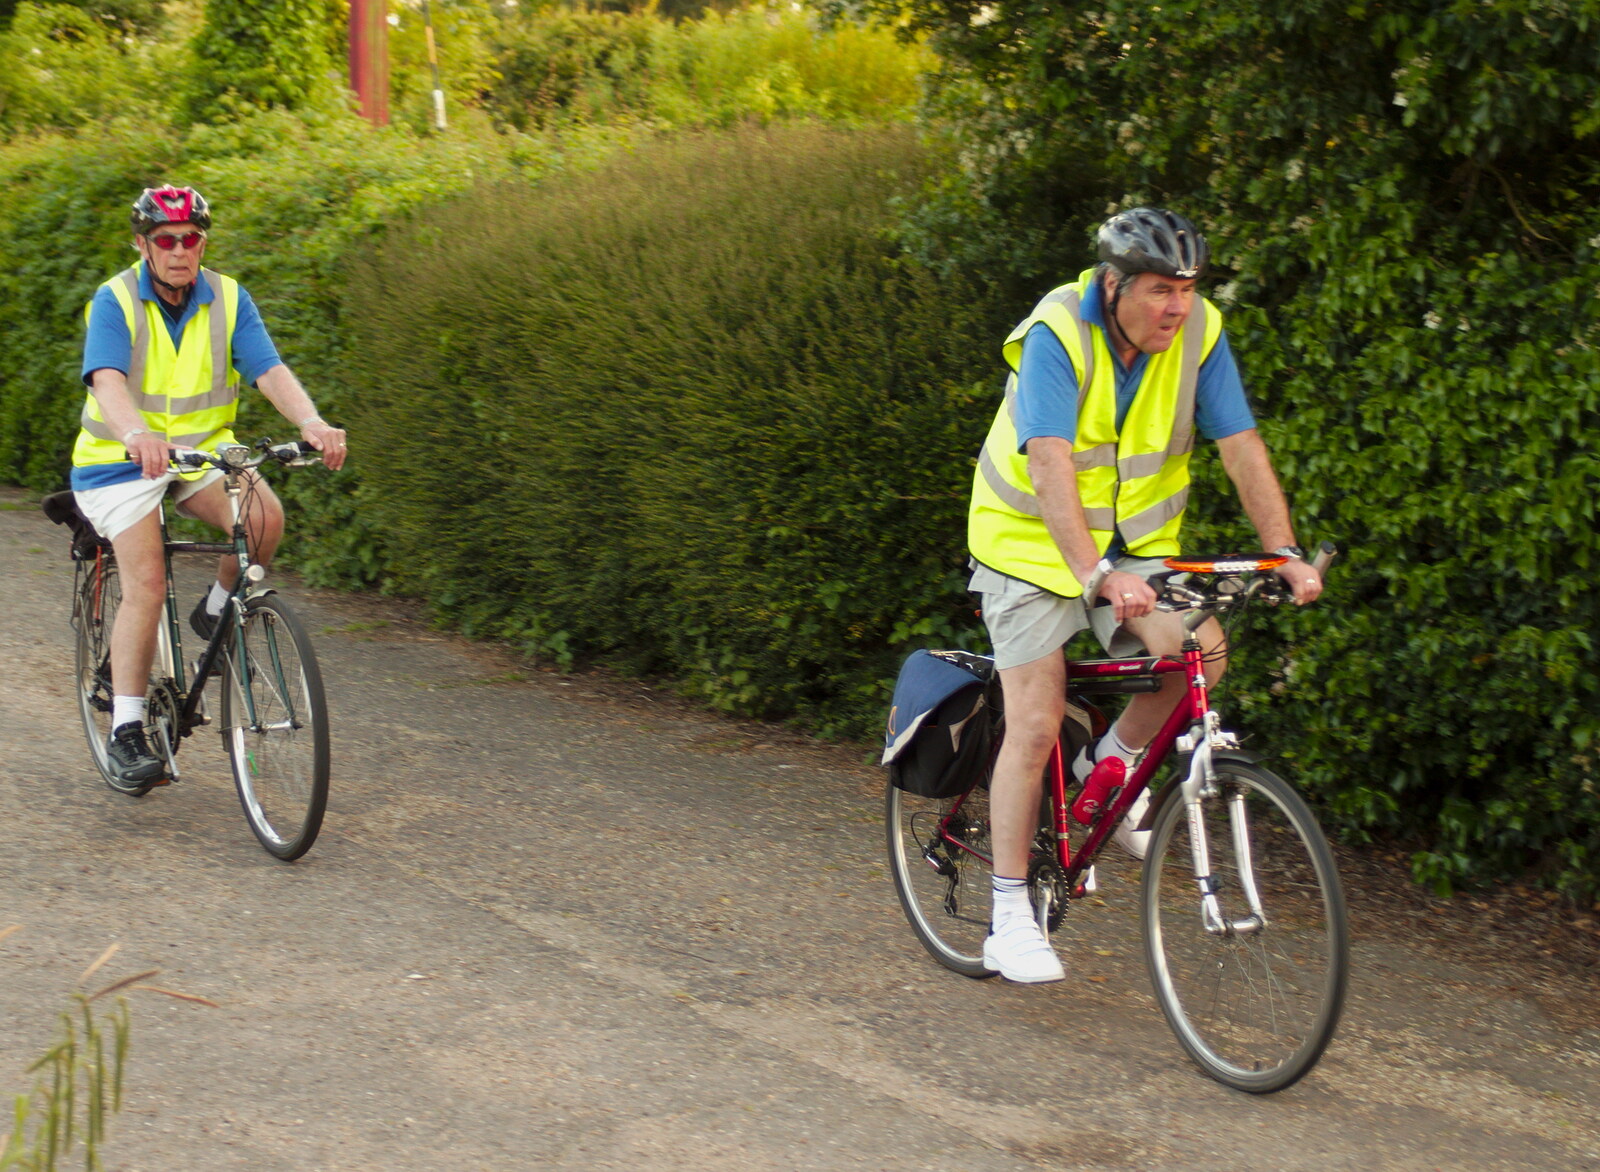 Colin and Alan arrive a few minutes later from The BSCC at The Crown, Bedfield, Suffolk - 15th May 2014